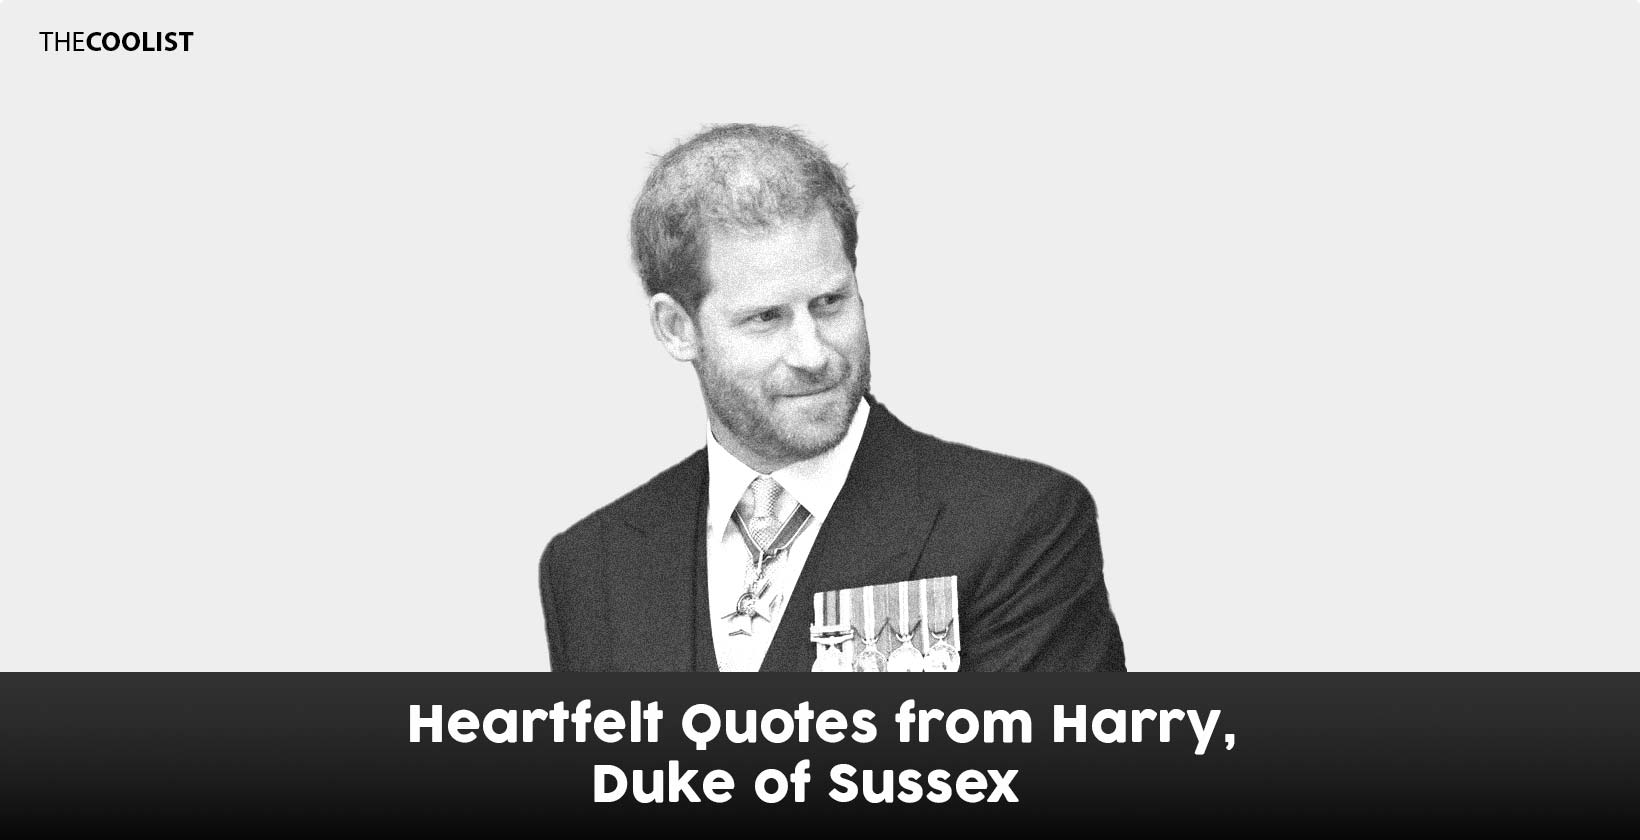 Prince Harry Quotes: Heartfelt and Eye-Opening Quotes from the Duke of  Sussex